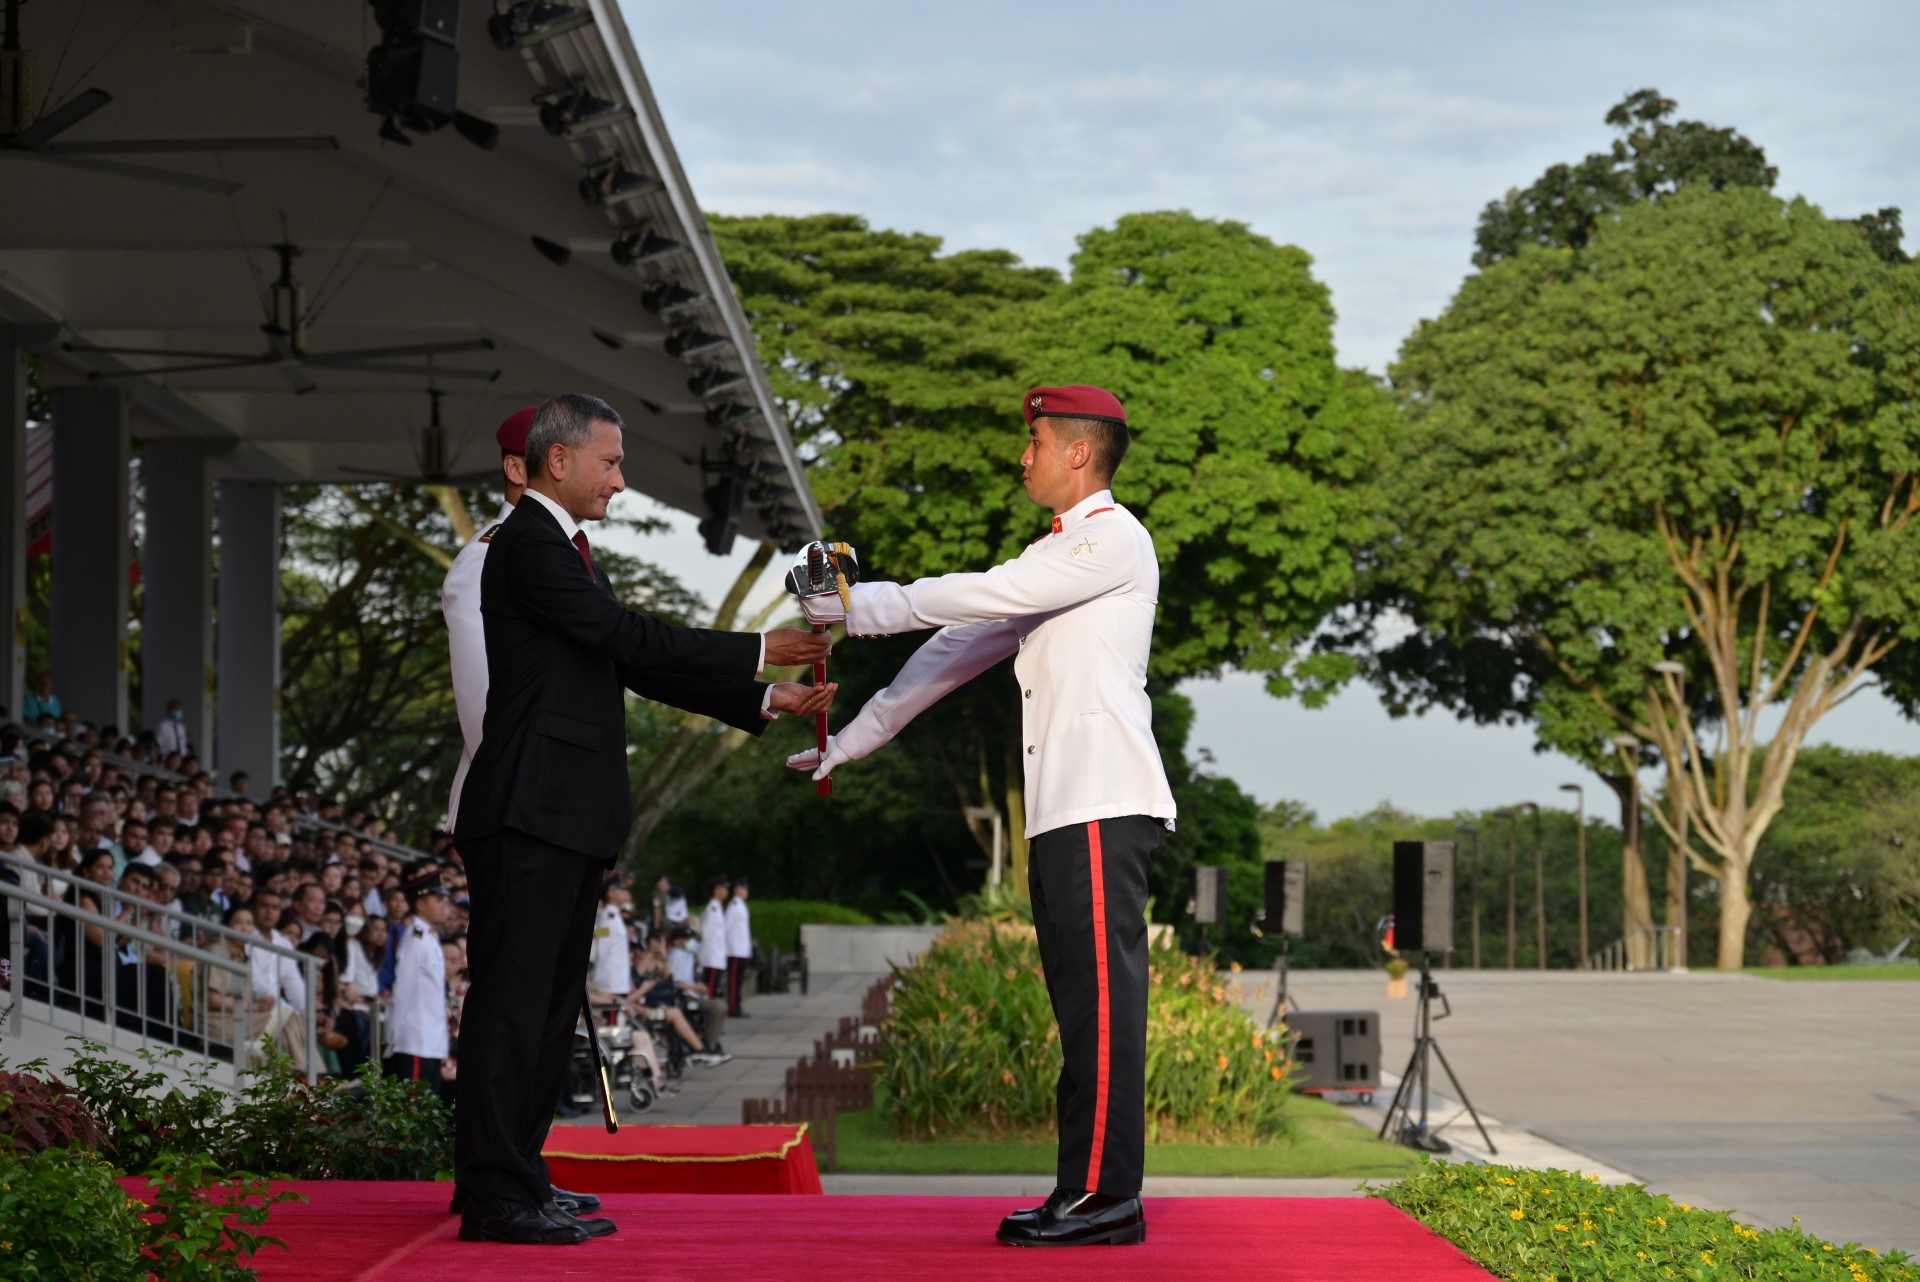 Dr Balakrishnan presenting the Sword of Honour to an Officer Cadet from the Singapore Army.